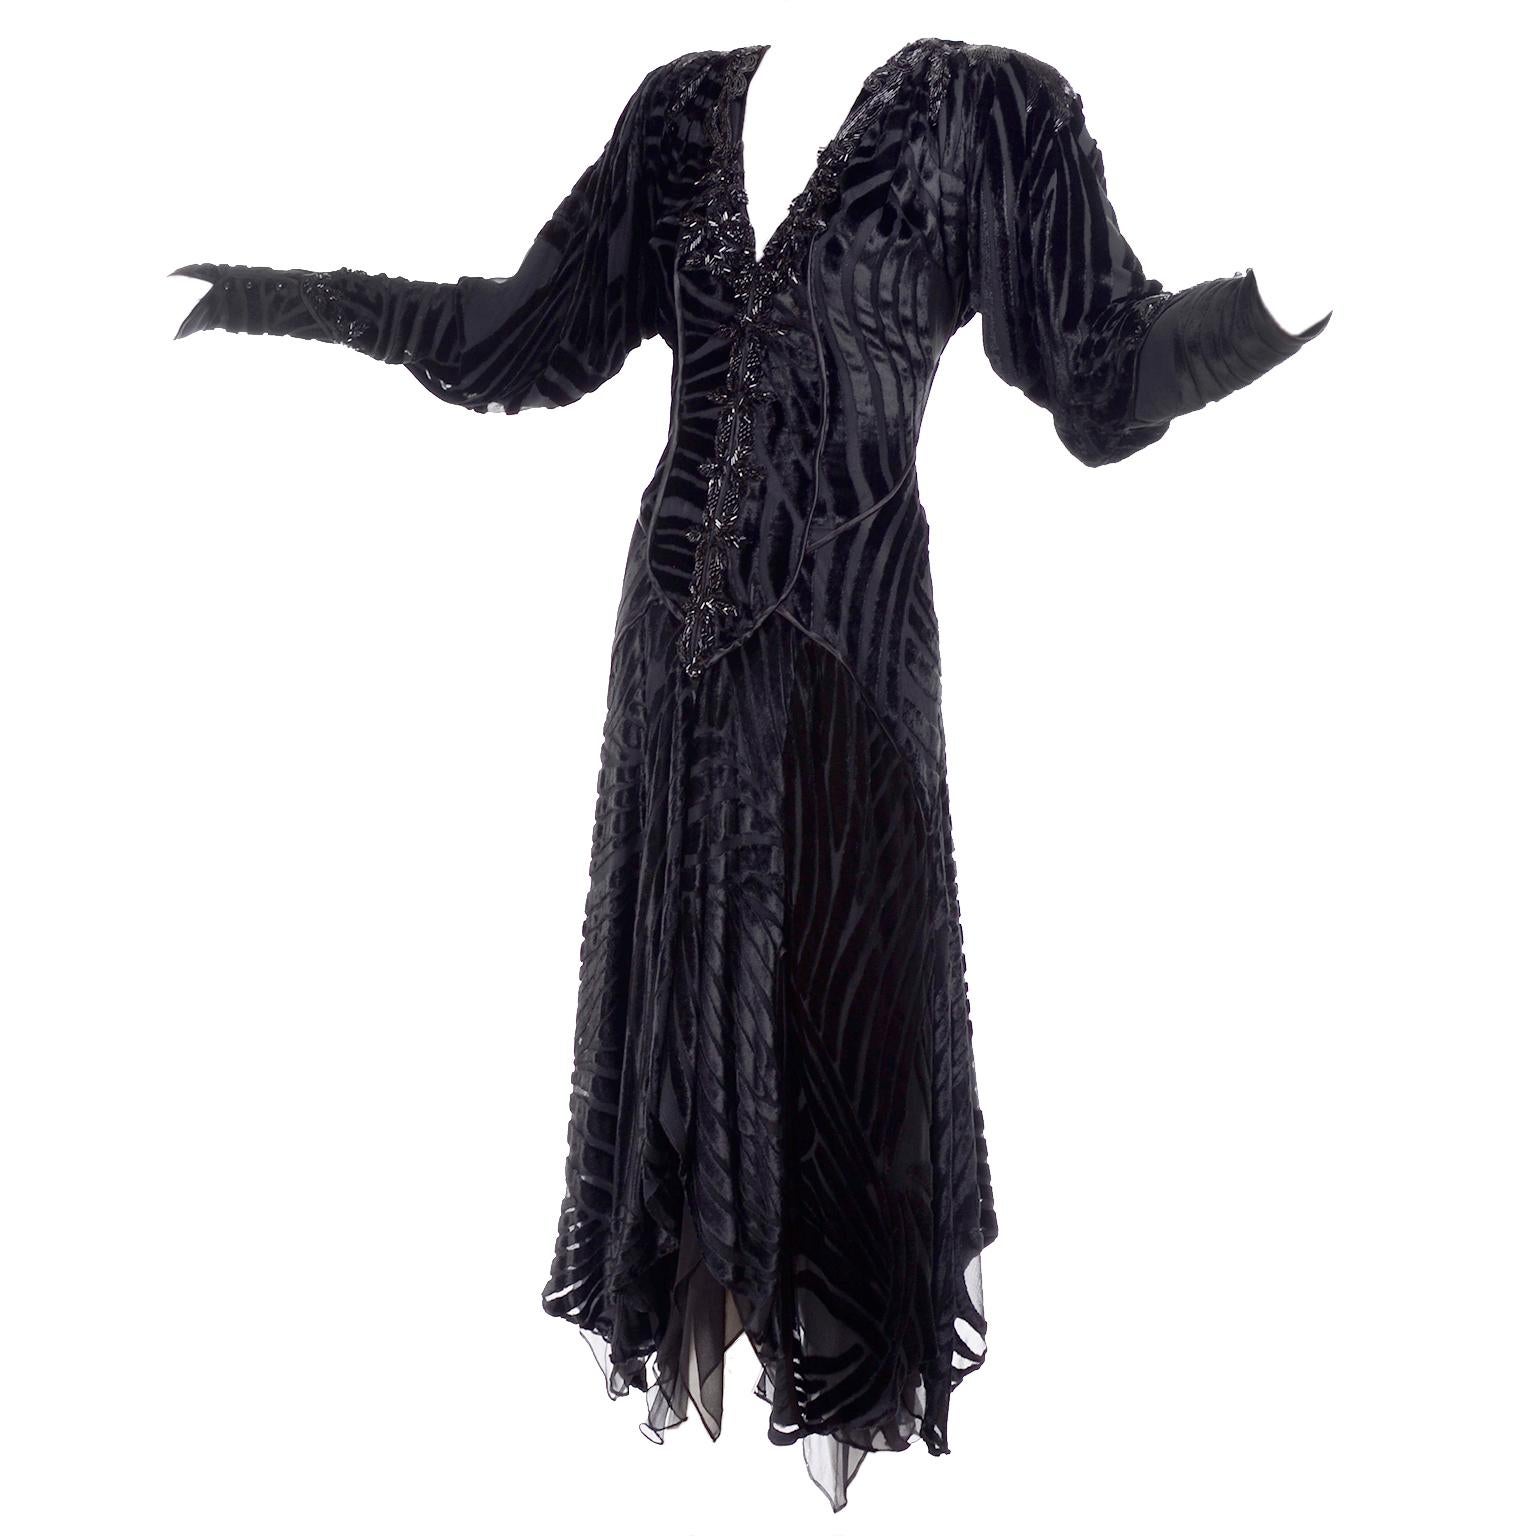 This is an absolutely gorgeous vintage black midi length black dress that came from the estate of a woman who owned incredible designer clothing. Her stunning wardrobe included rare designer pieces, avant garde clothing,  and sensational mid to late